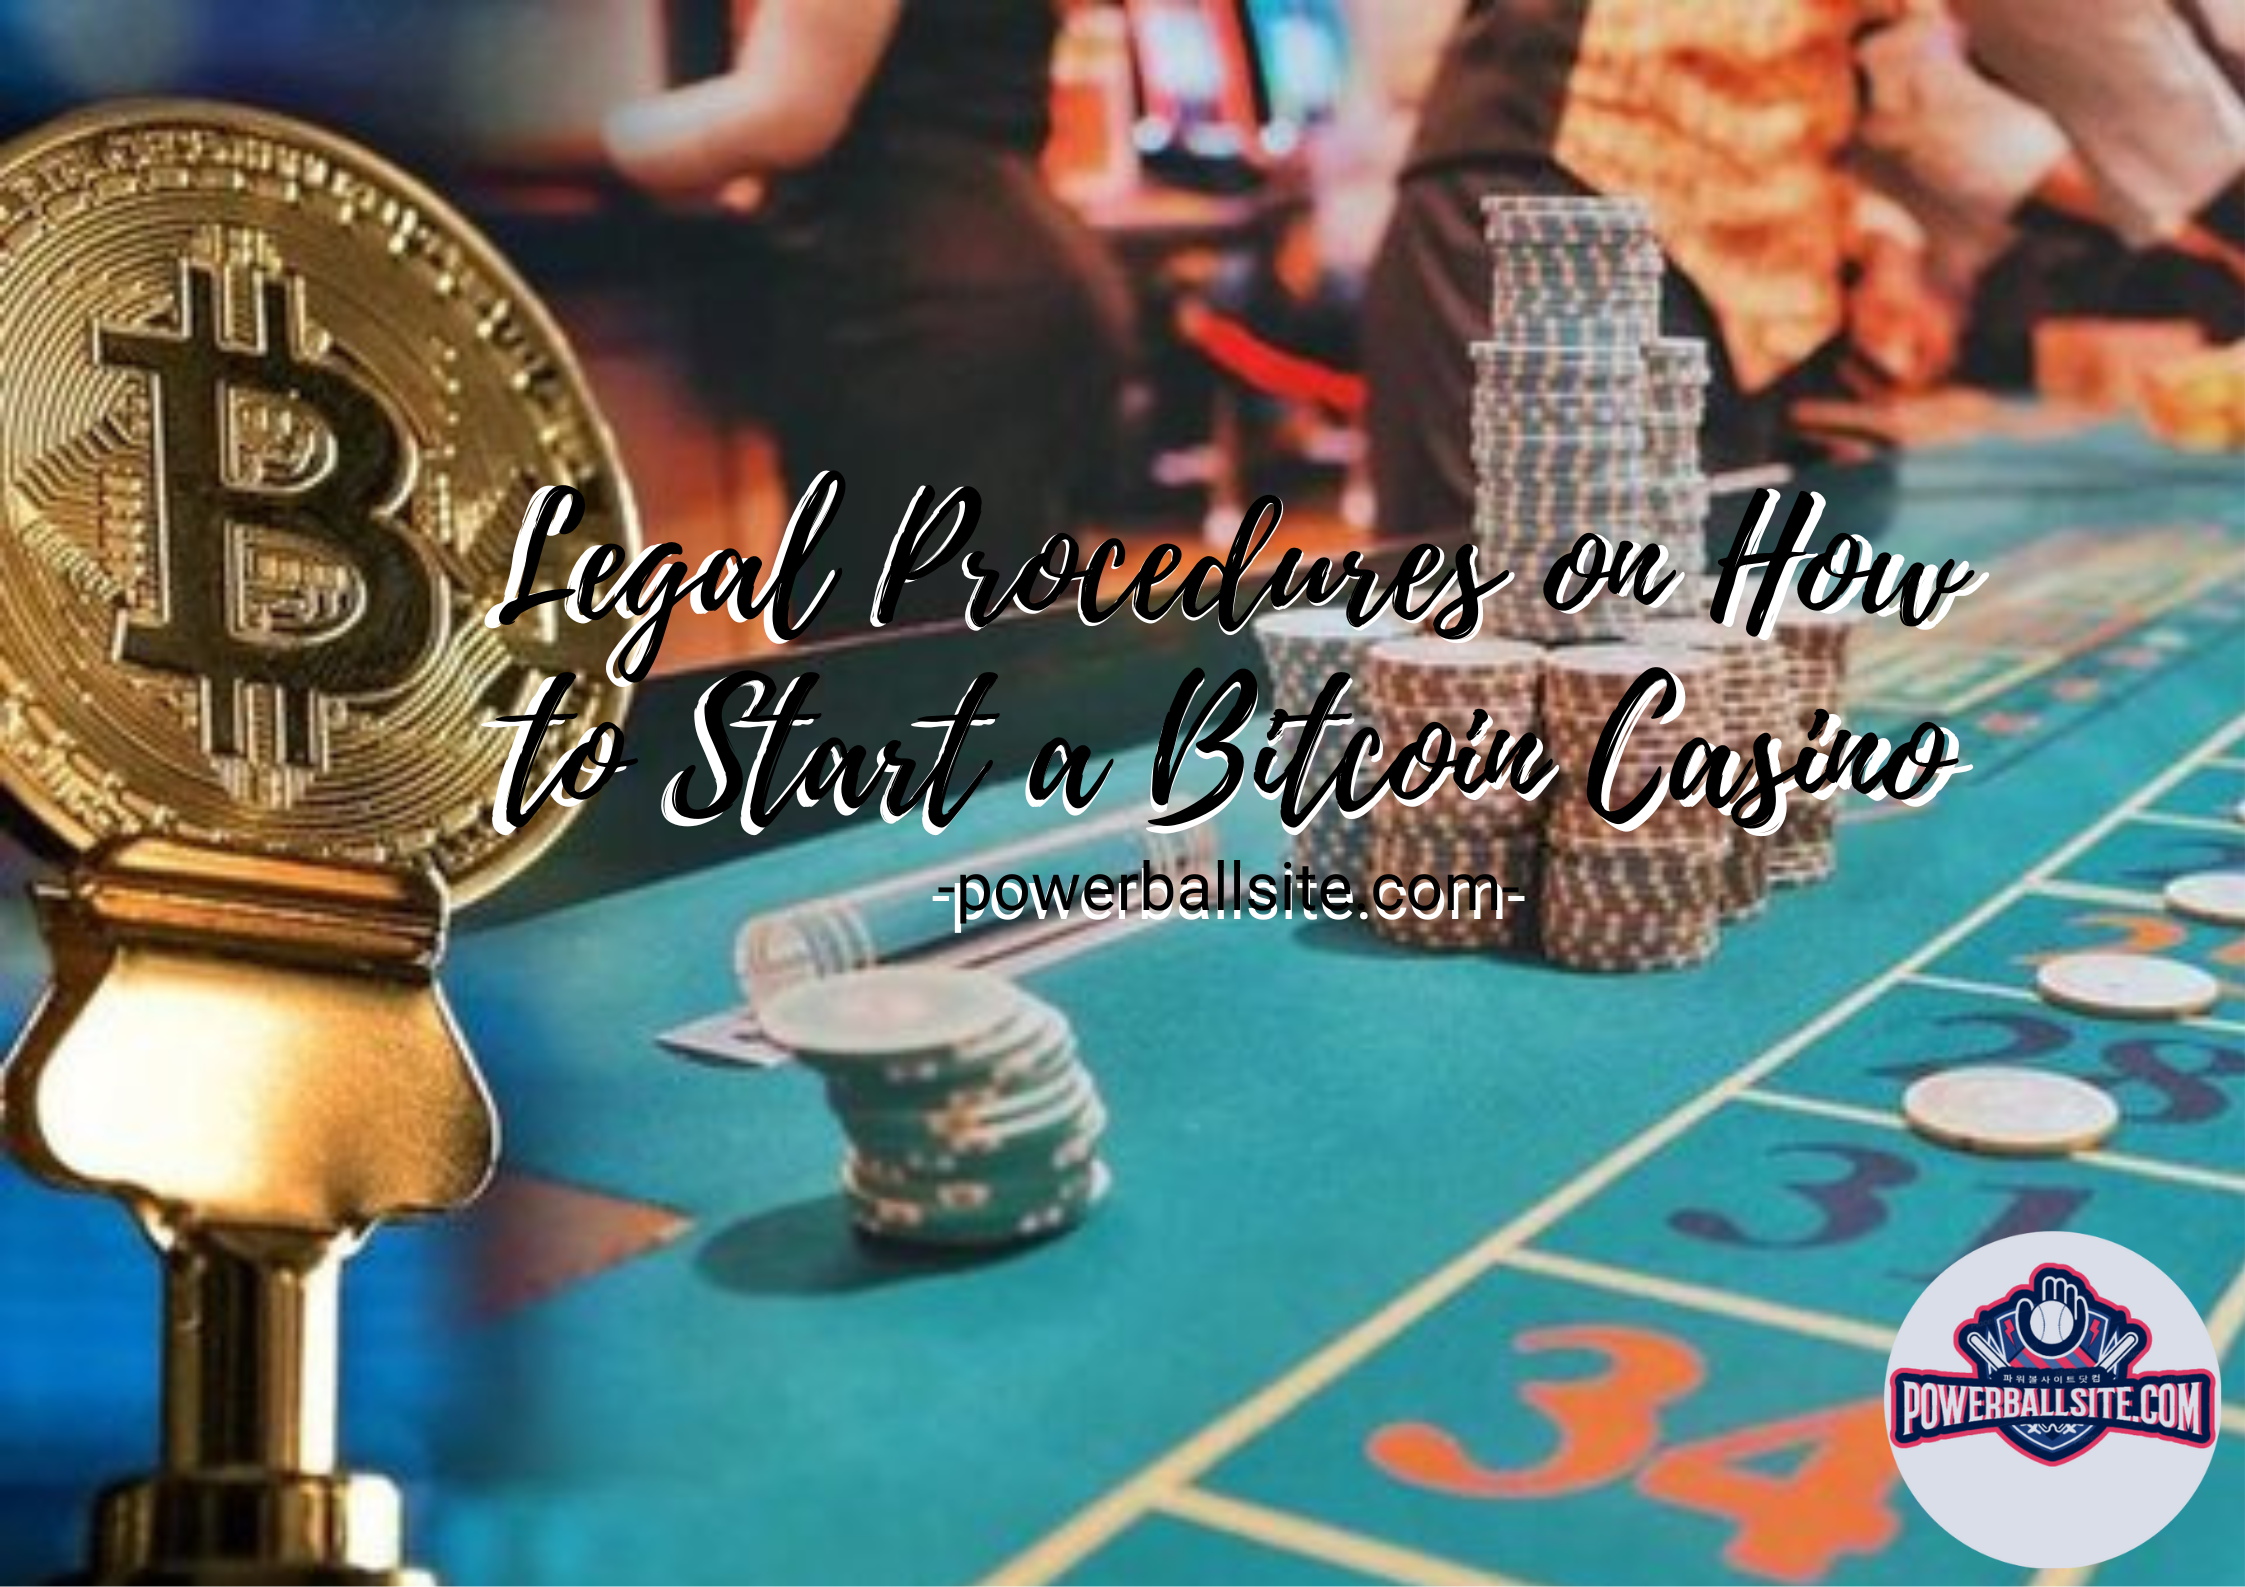 Legal Procedures on How to Start a Bitcoin Casino